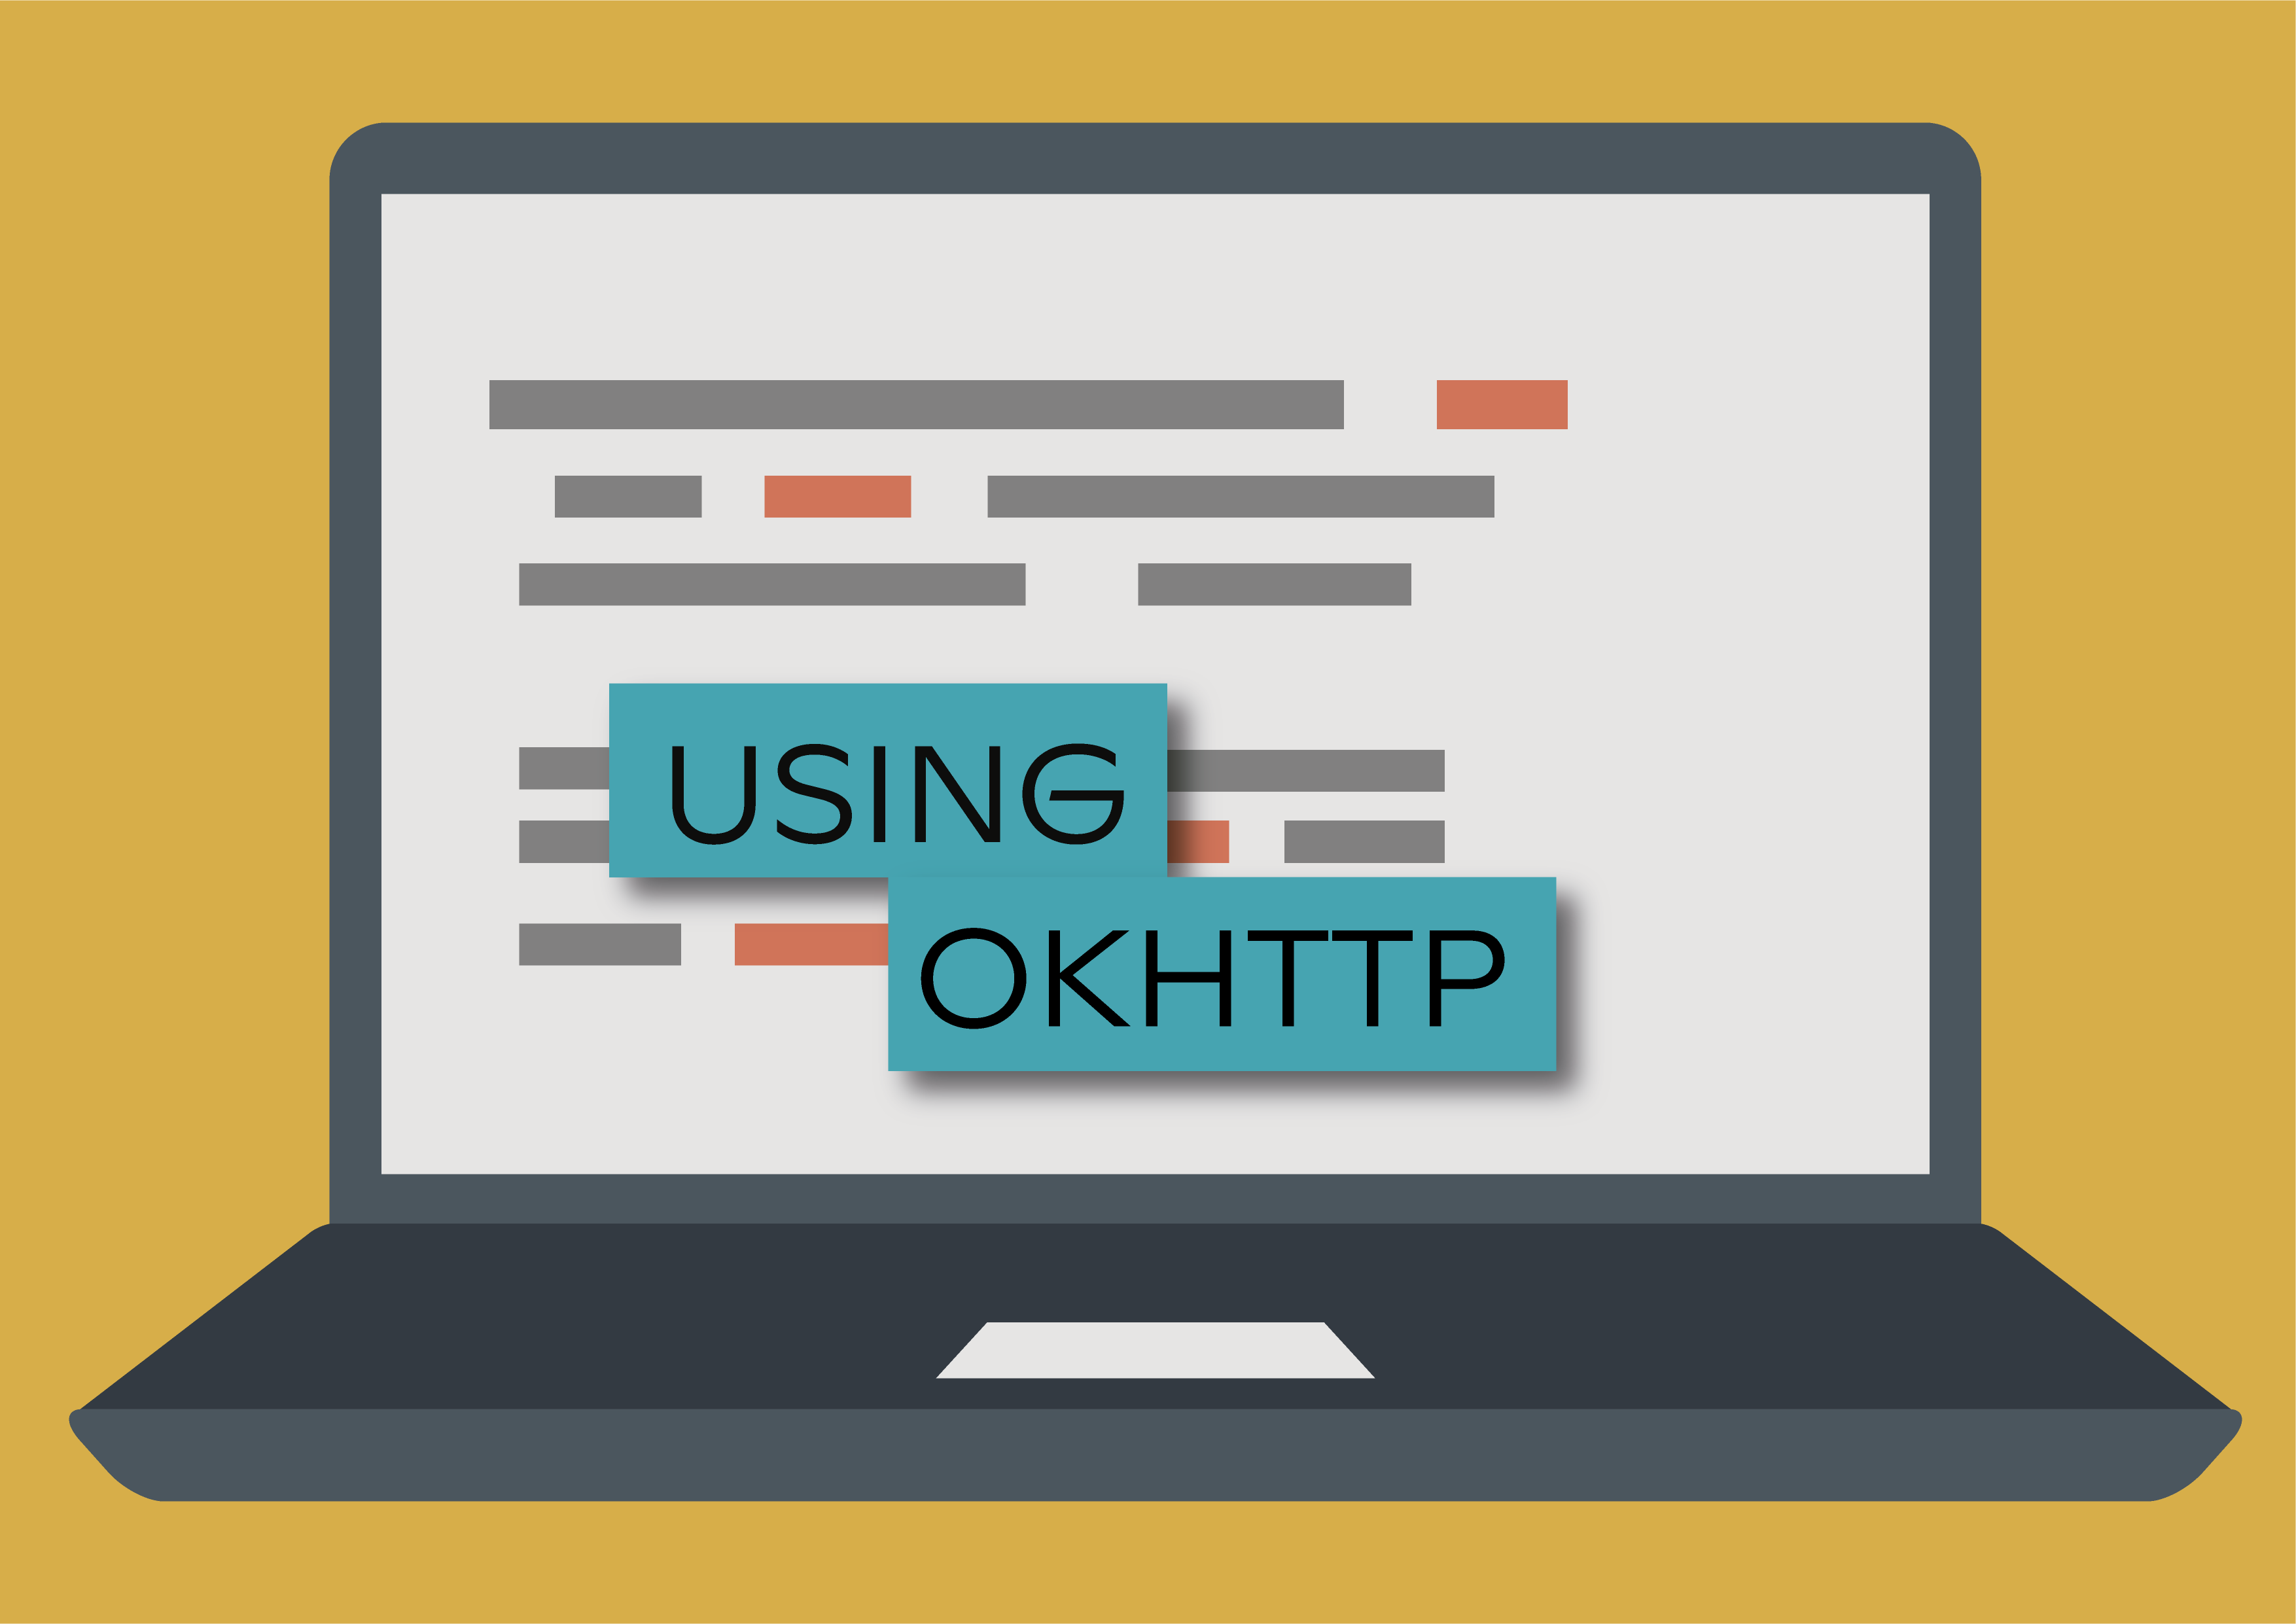 OkHttp: Android Tutorial